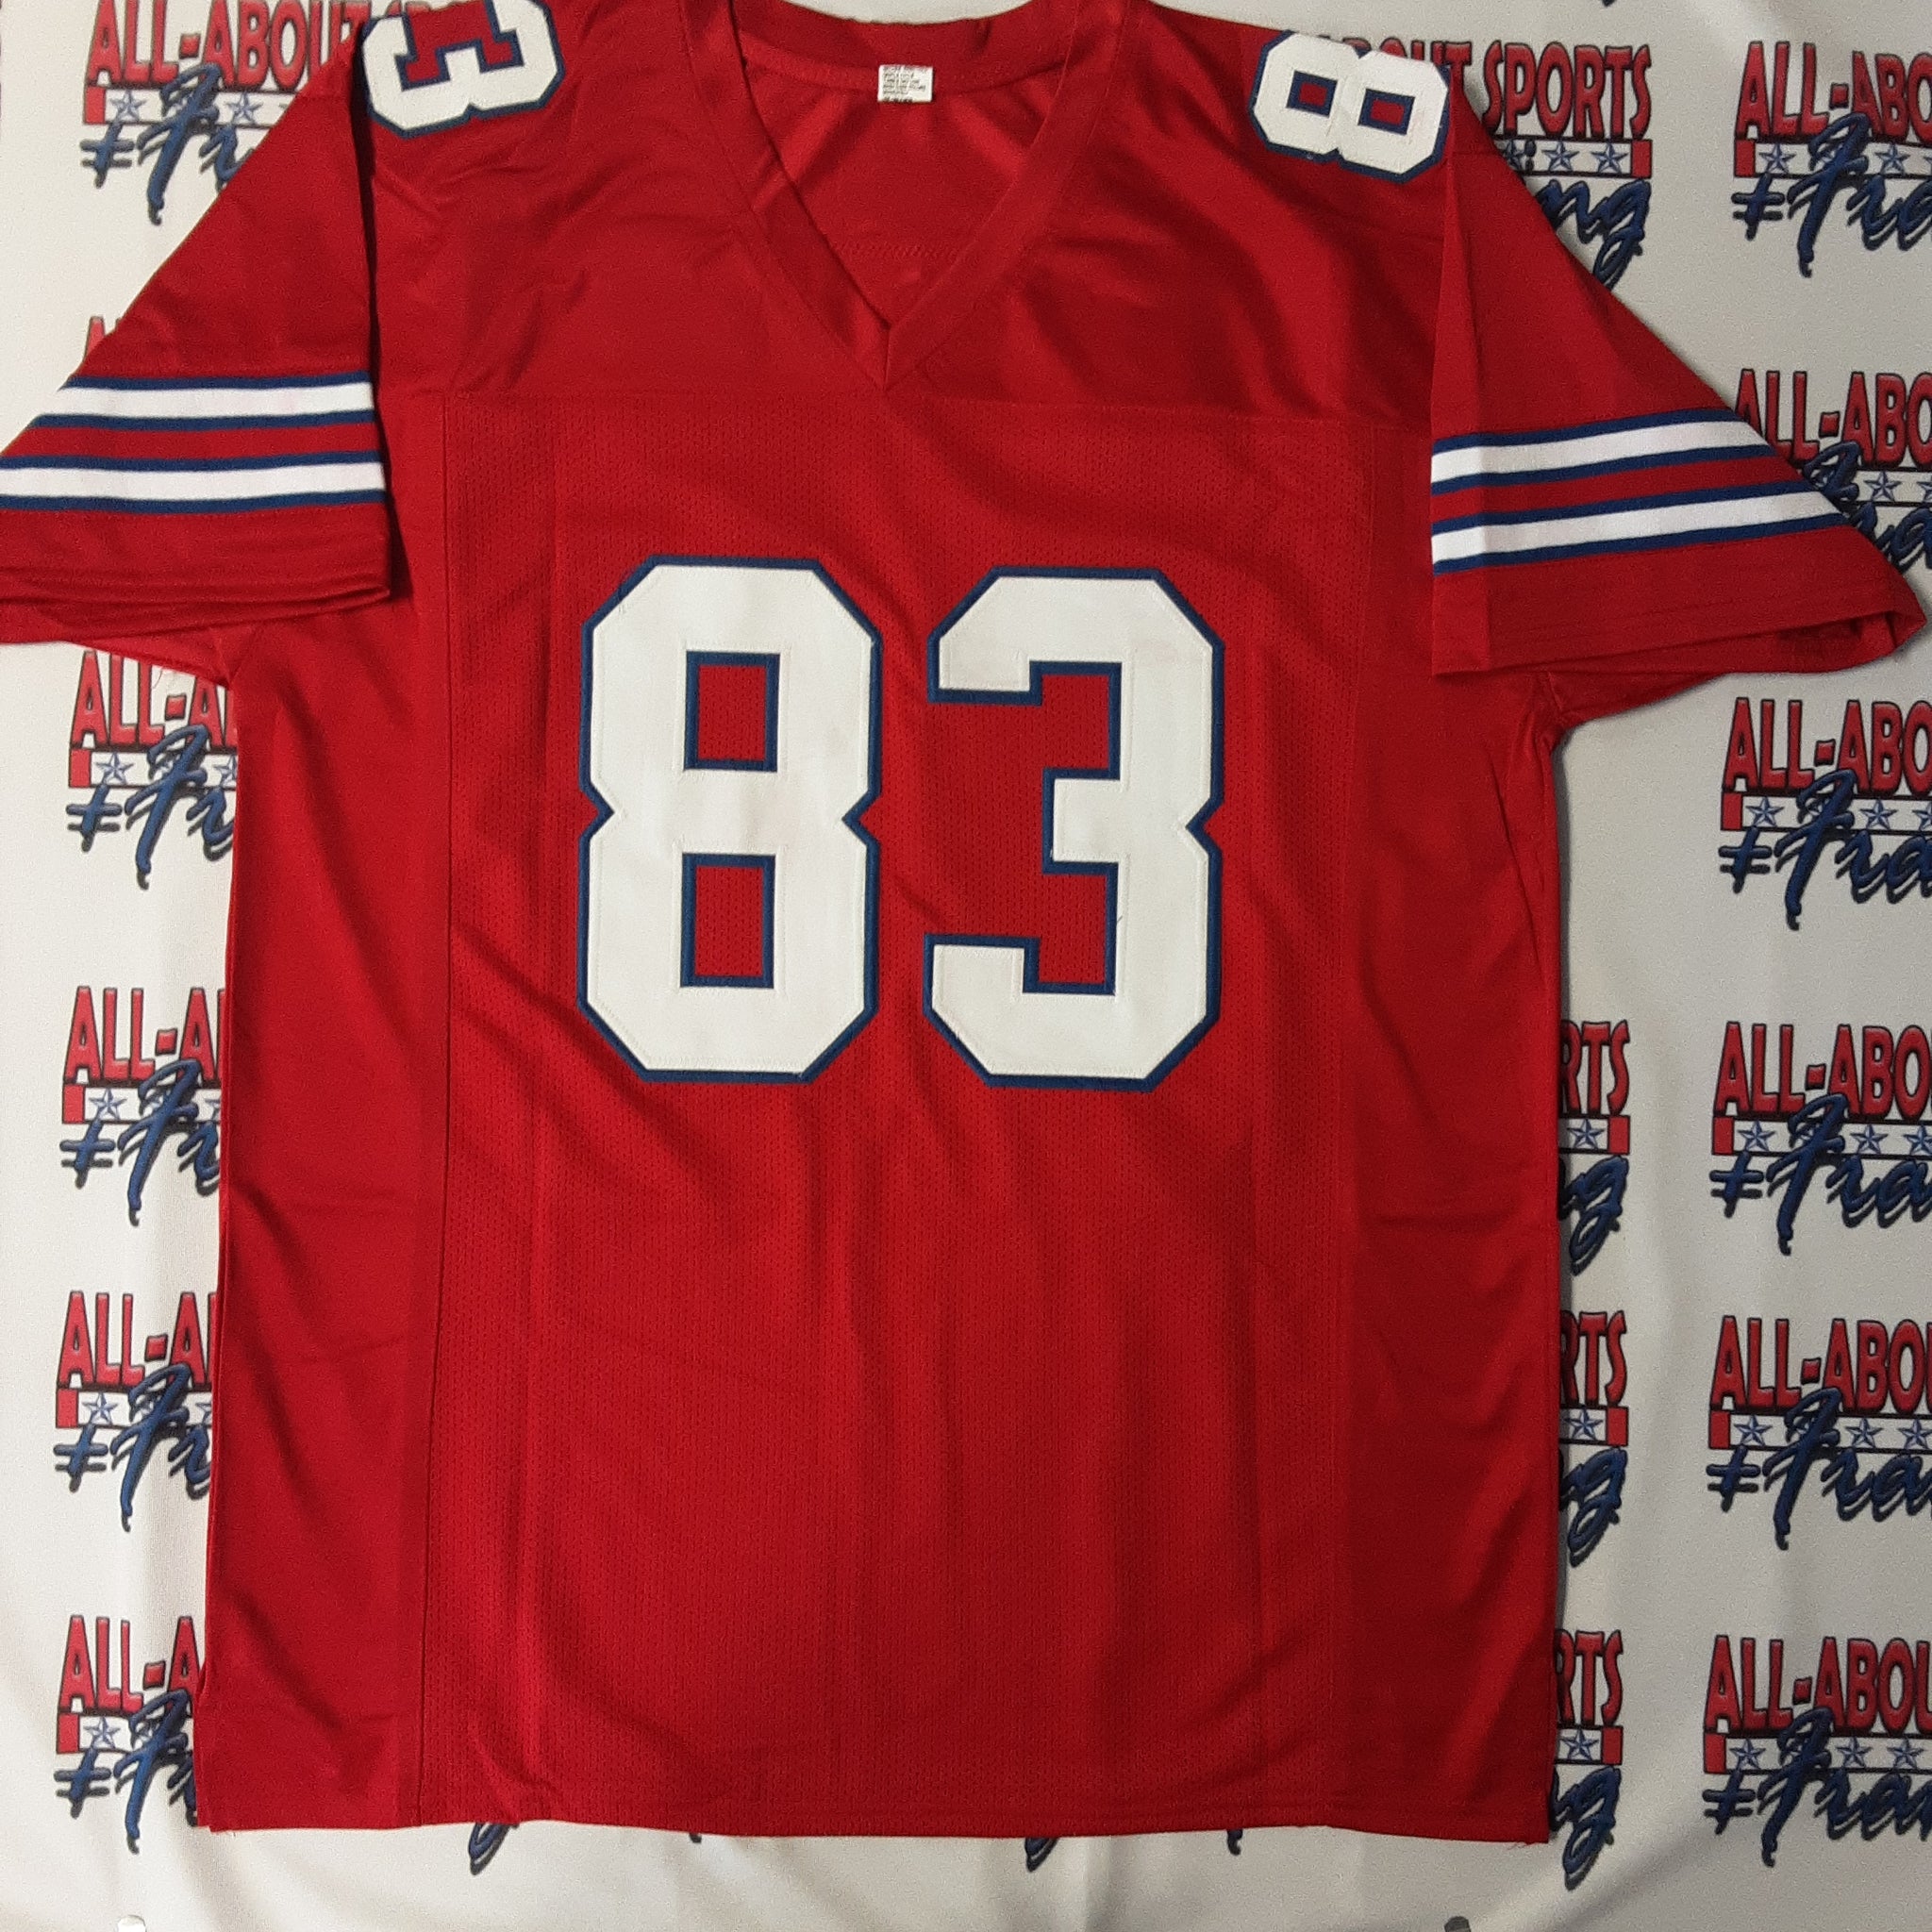 Andre Reed Authentic Signed Pro Style Jersey Autographed JSA-